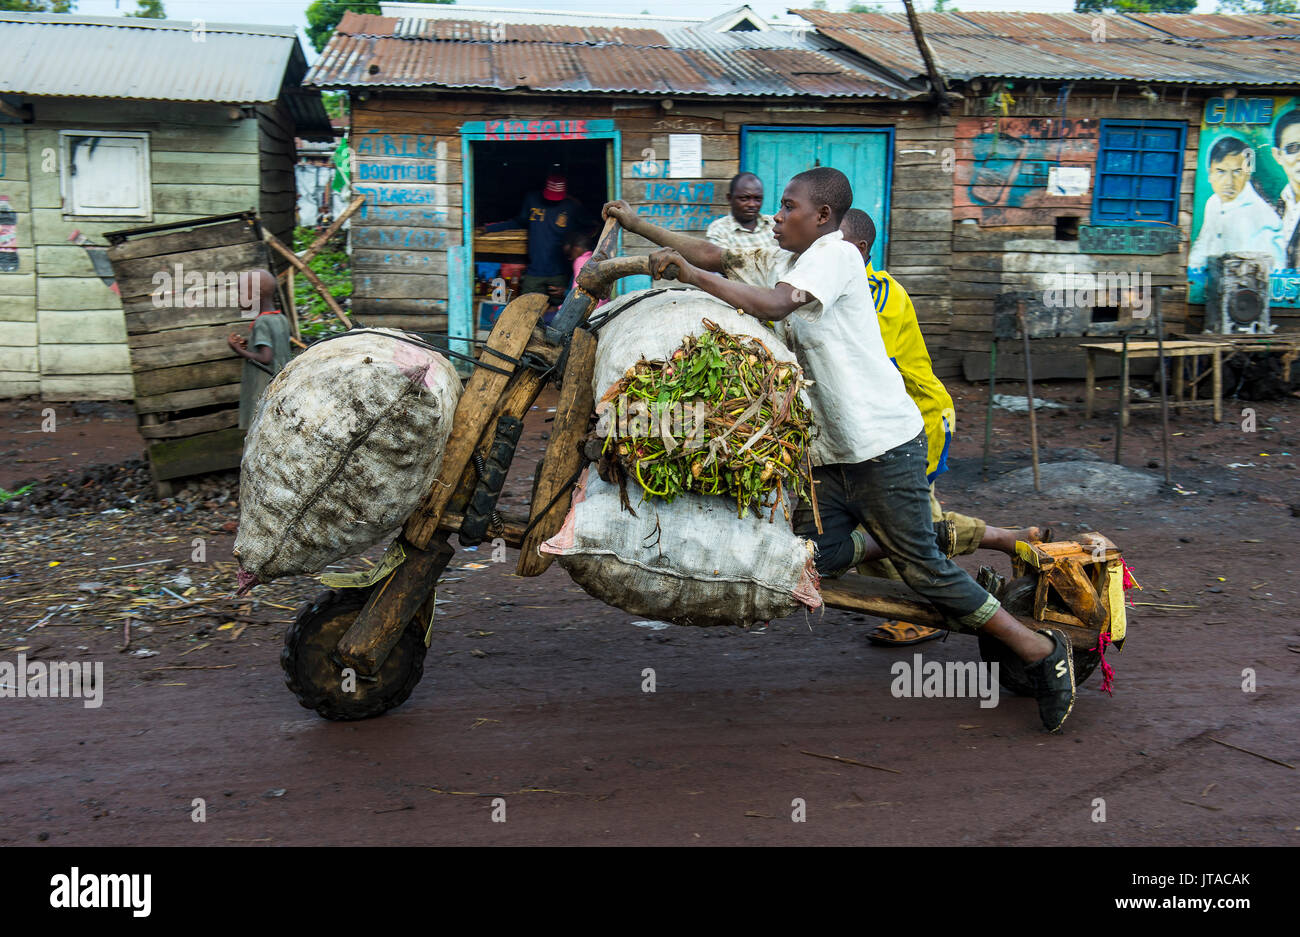 Local man transporting their goods on self made carriers, Goma, Democratic Republic of the Congo, Africa Stock Photo